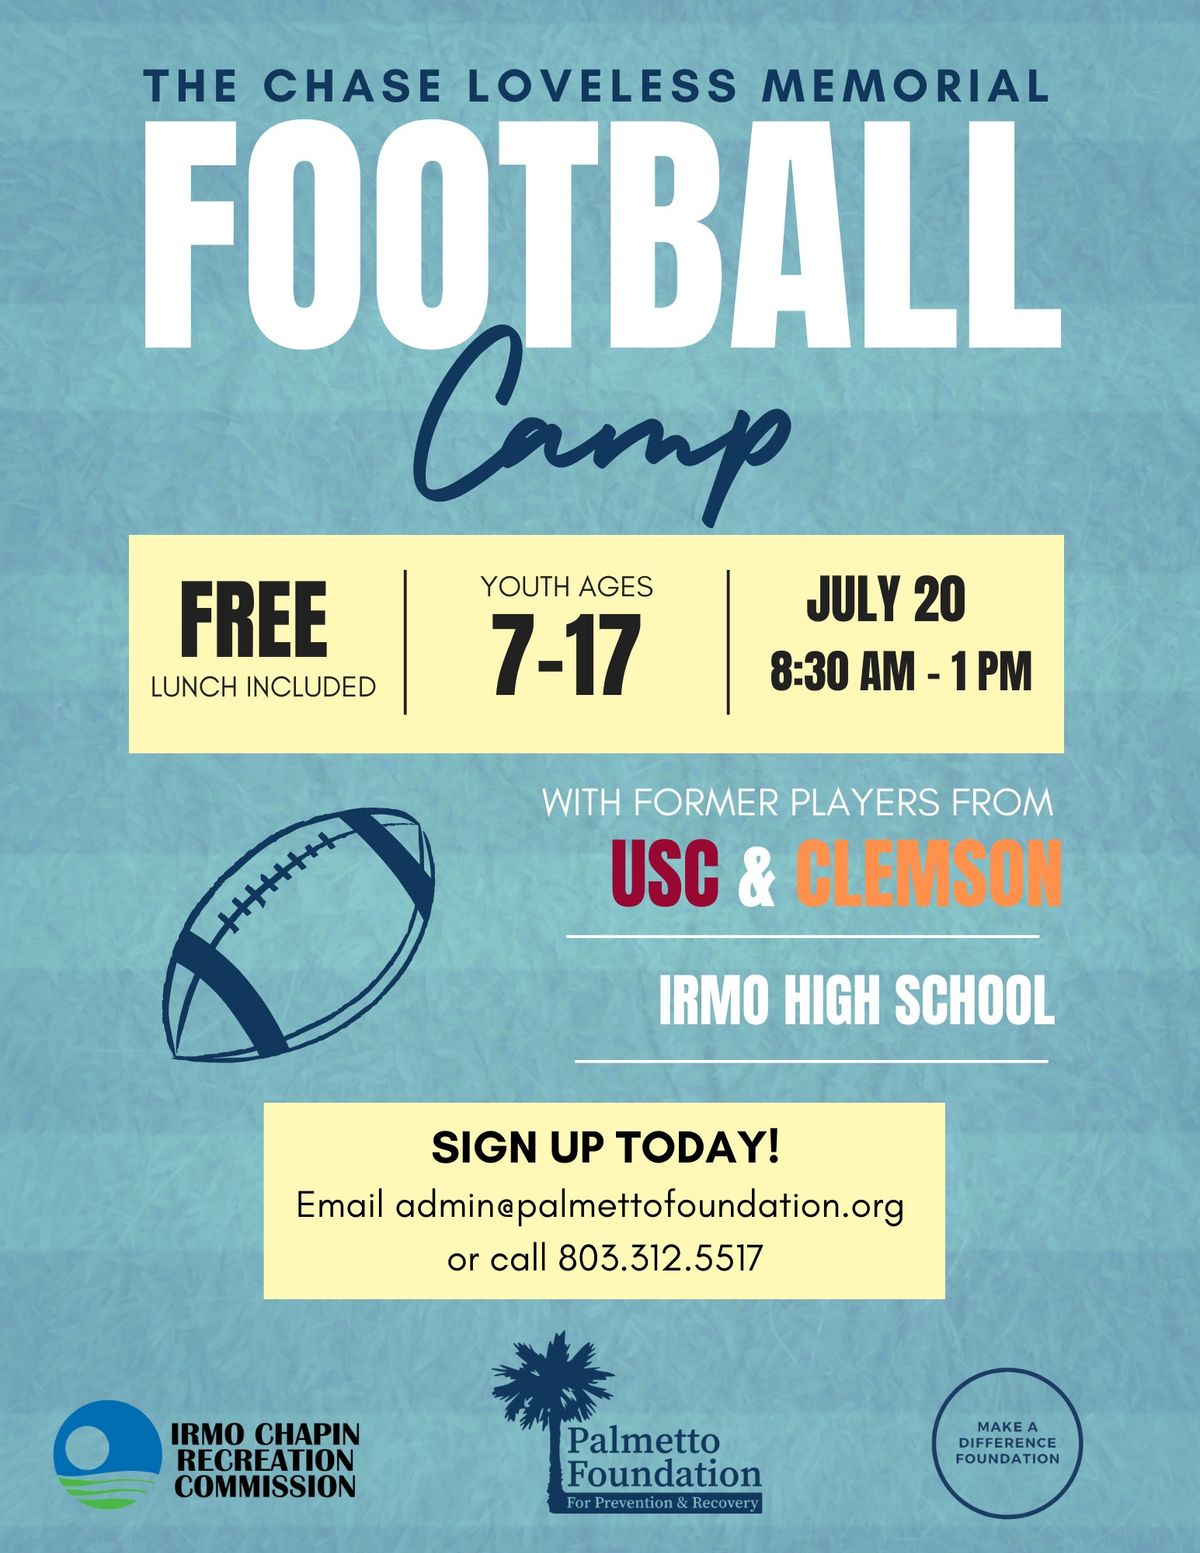 The Chase Loveless Empowerment Football Camp